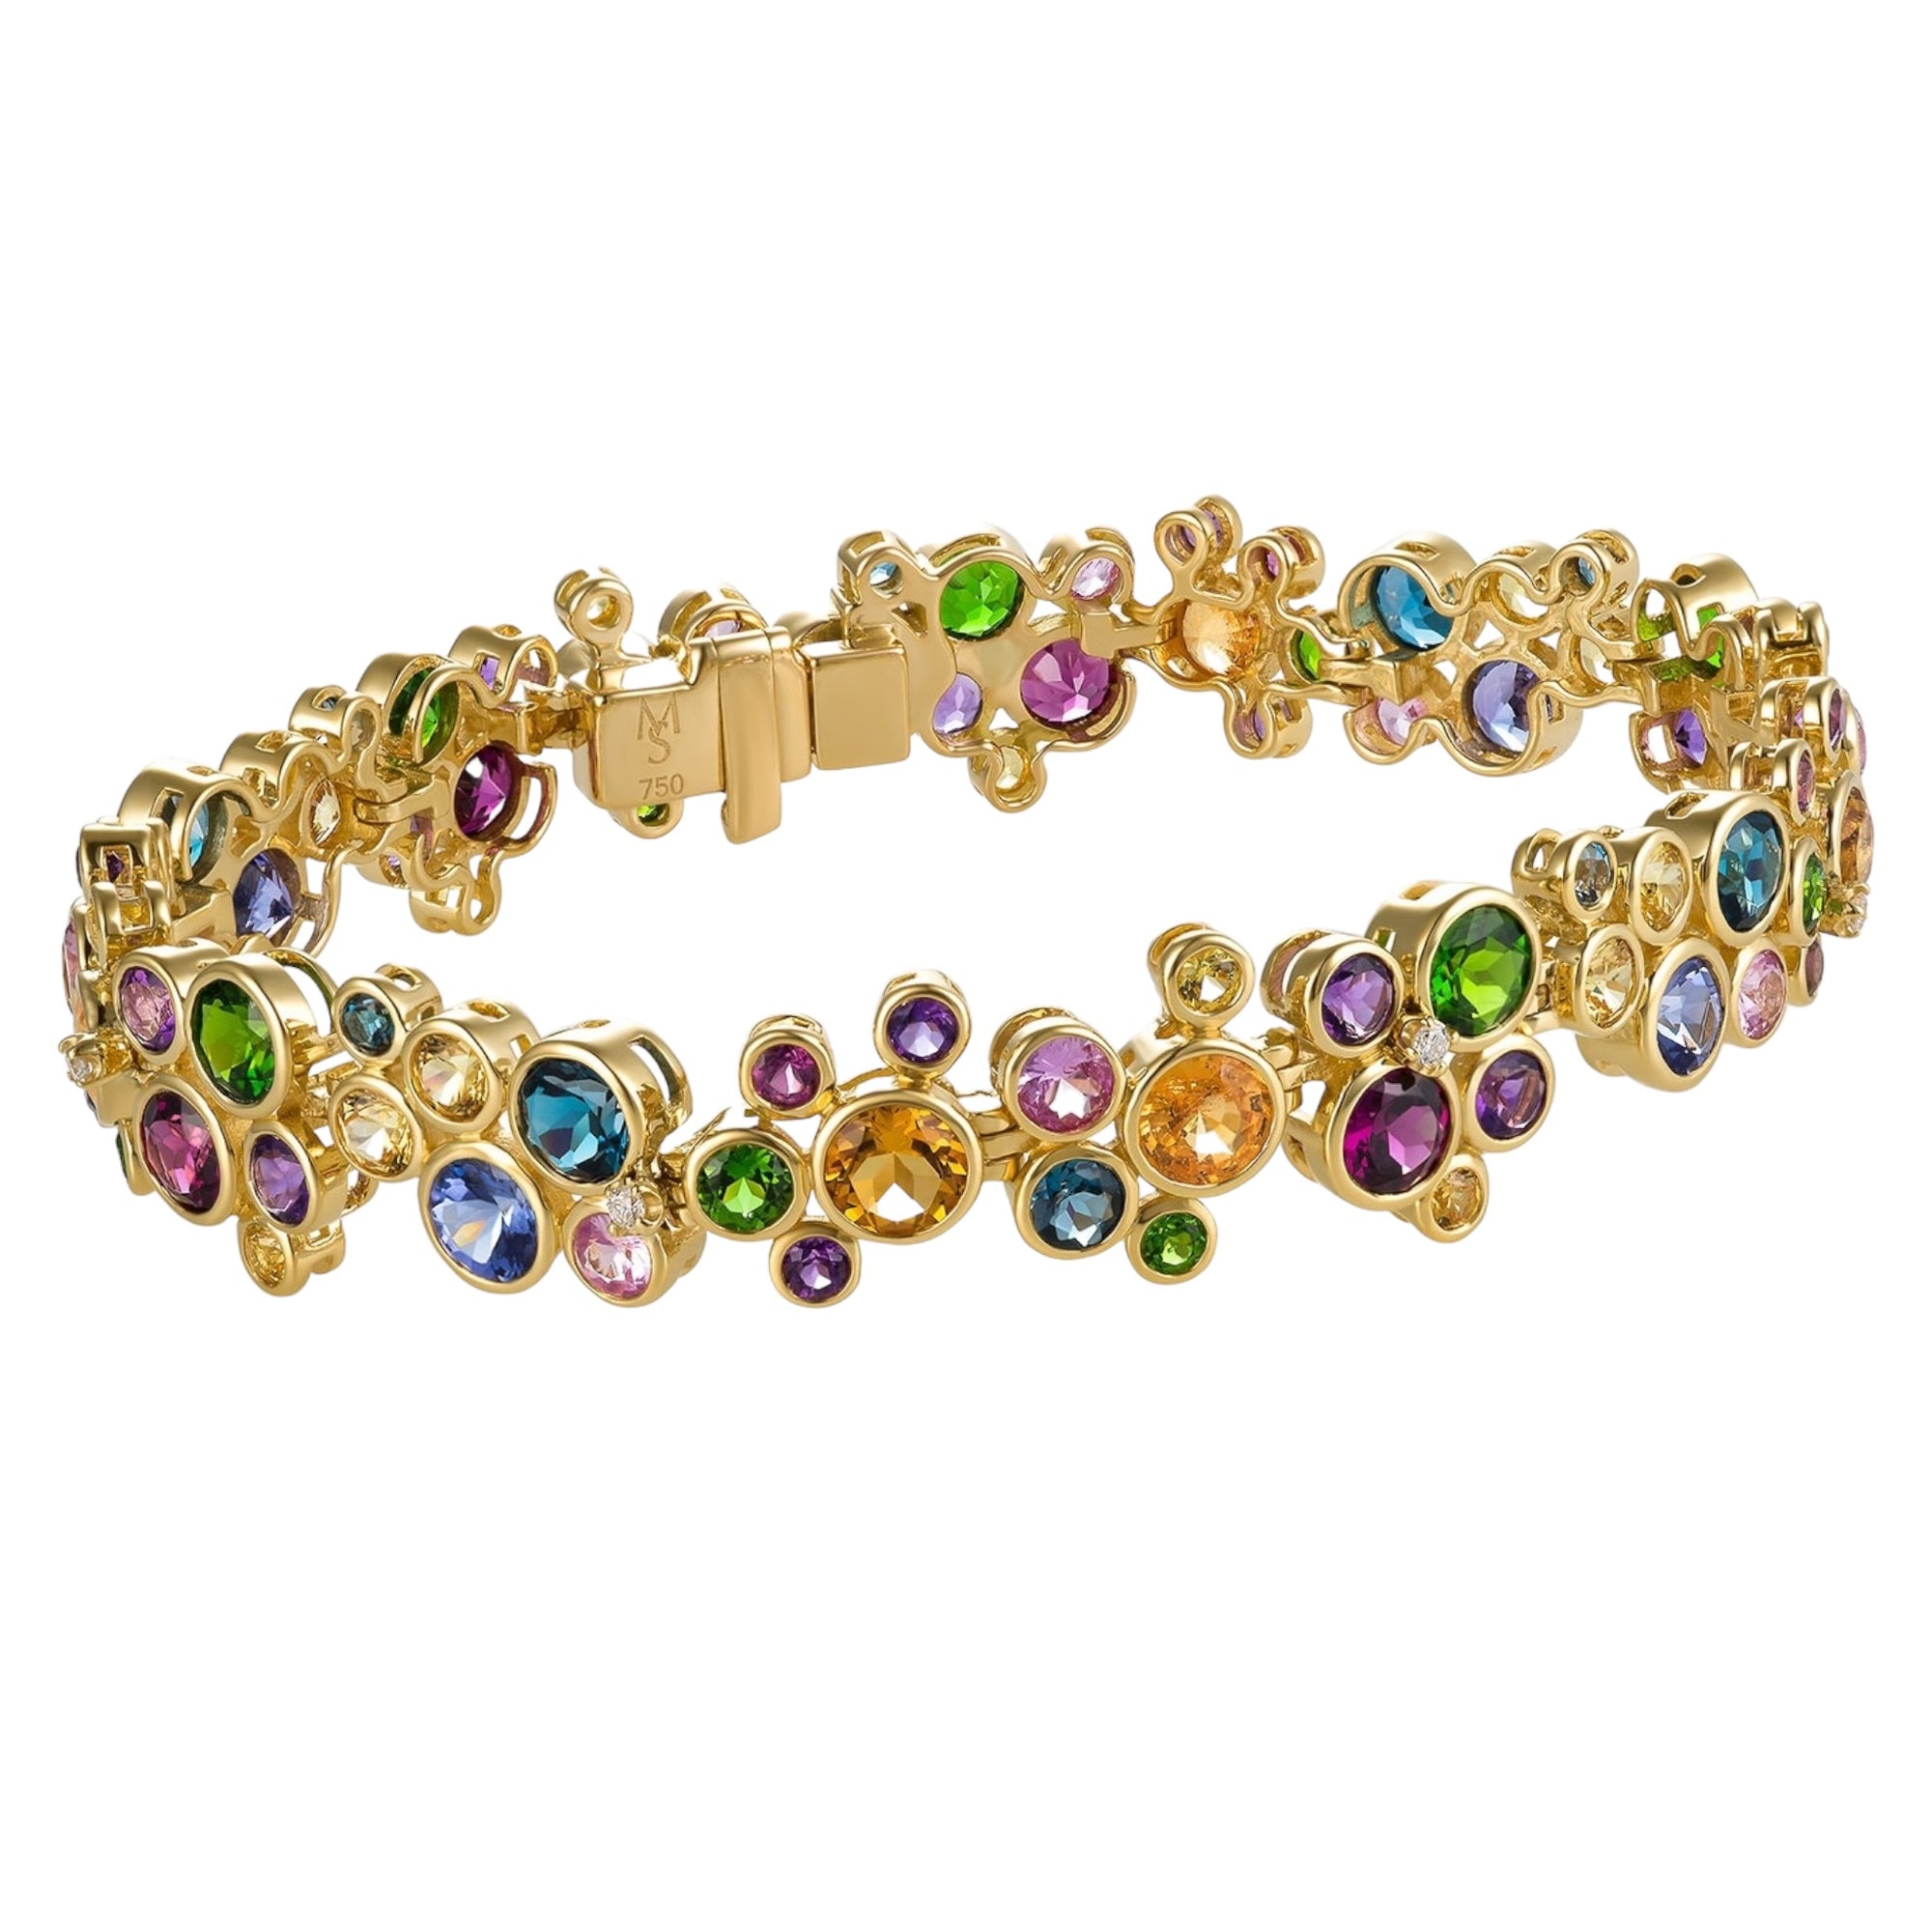 Milkyway Bracelet by Martha Seely available at Talisman Collection Fine Jewelers in El Dorado Hills, CA and online. Stats: Here is a bracelet designed make you happy! 14.53 cts of sparkling multi-color gems including blue topaz, citrine, pink and green tourmaline, amethyst, iolite, spessartite, yellow sapphires, pink garnets, and 0.070 cts of diamonds adorn this unique tennis-style bracelet. 